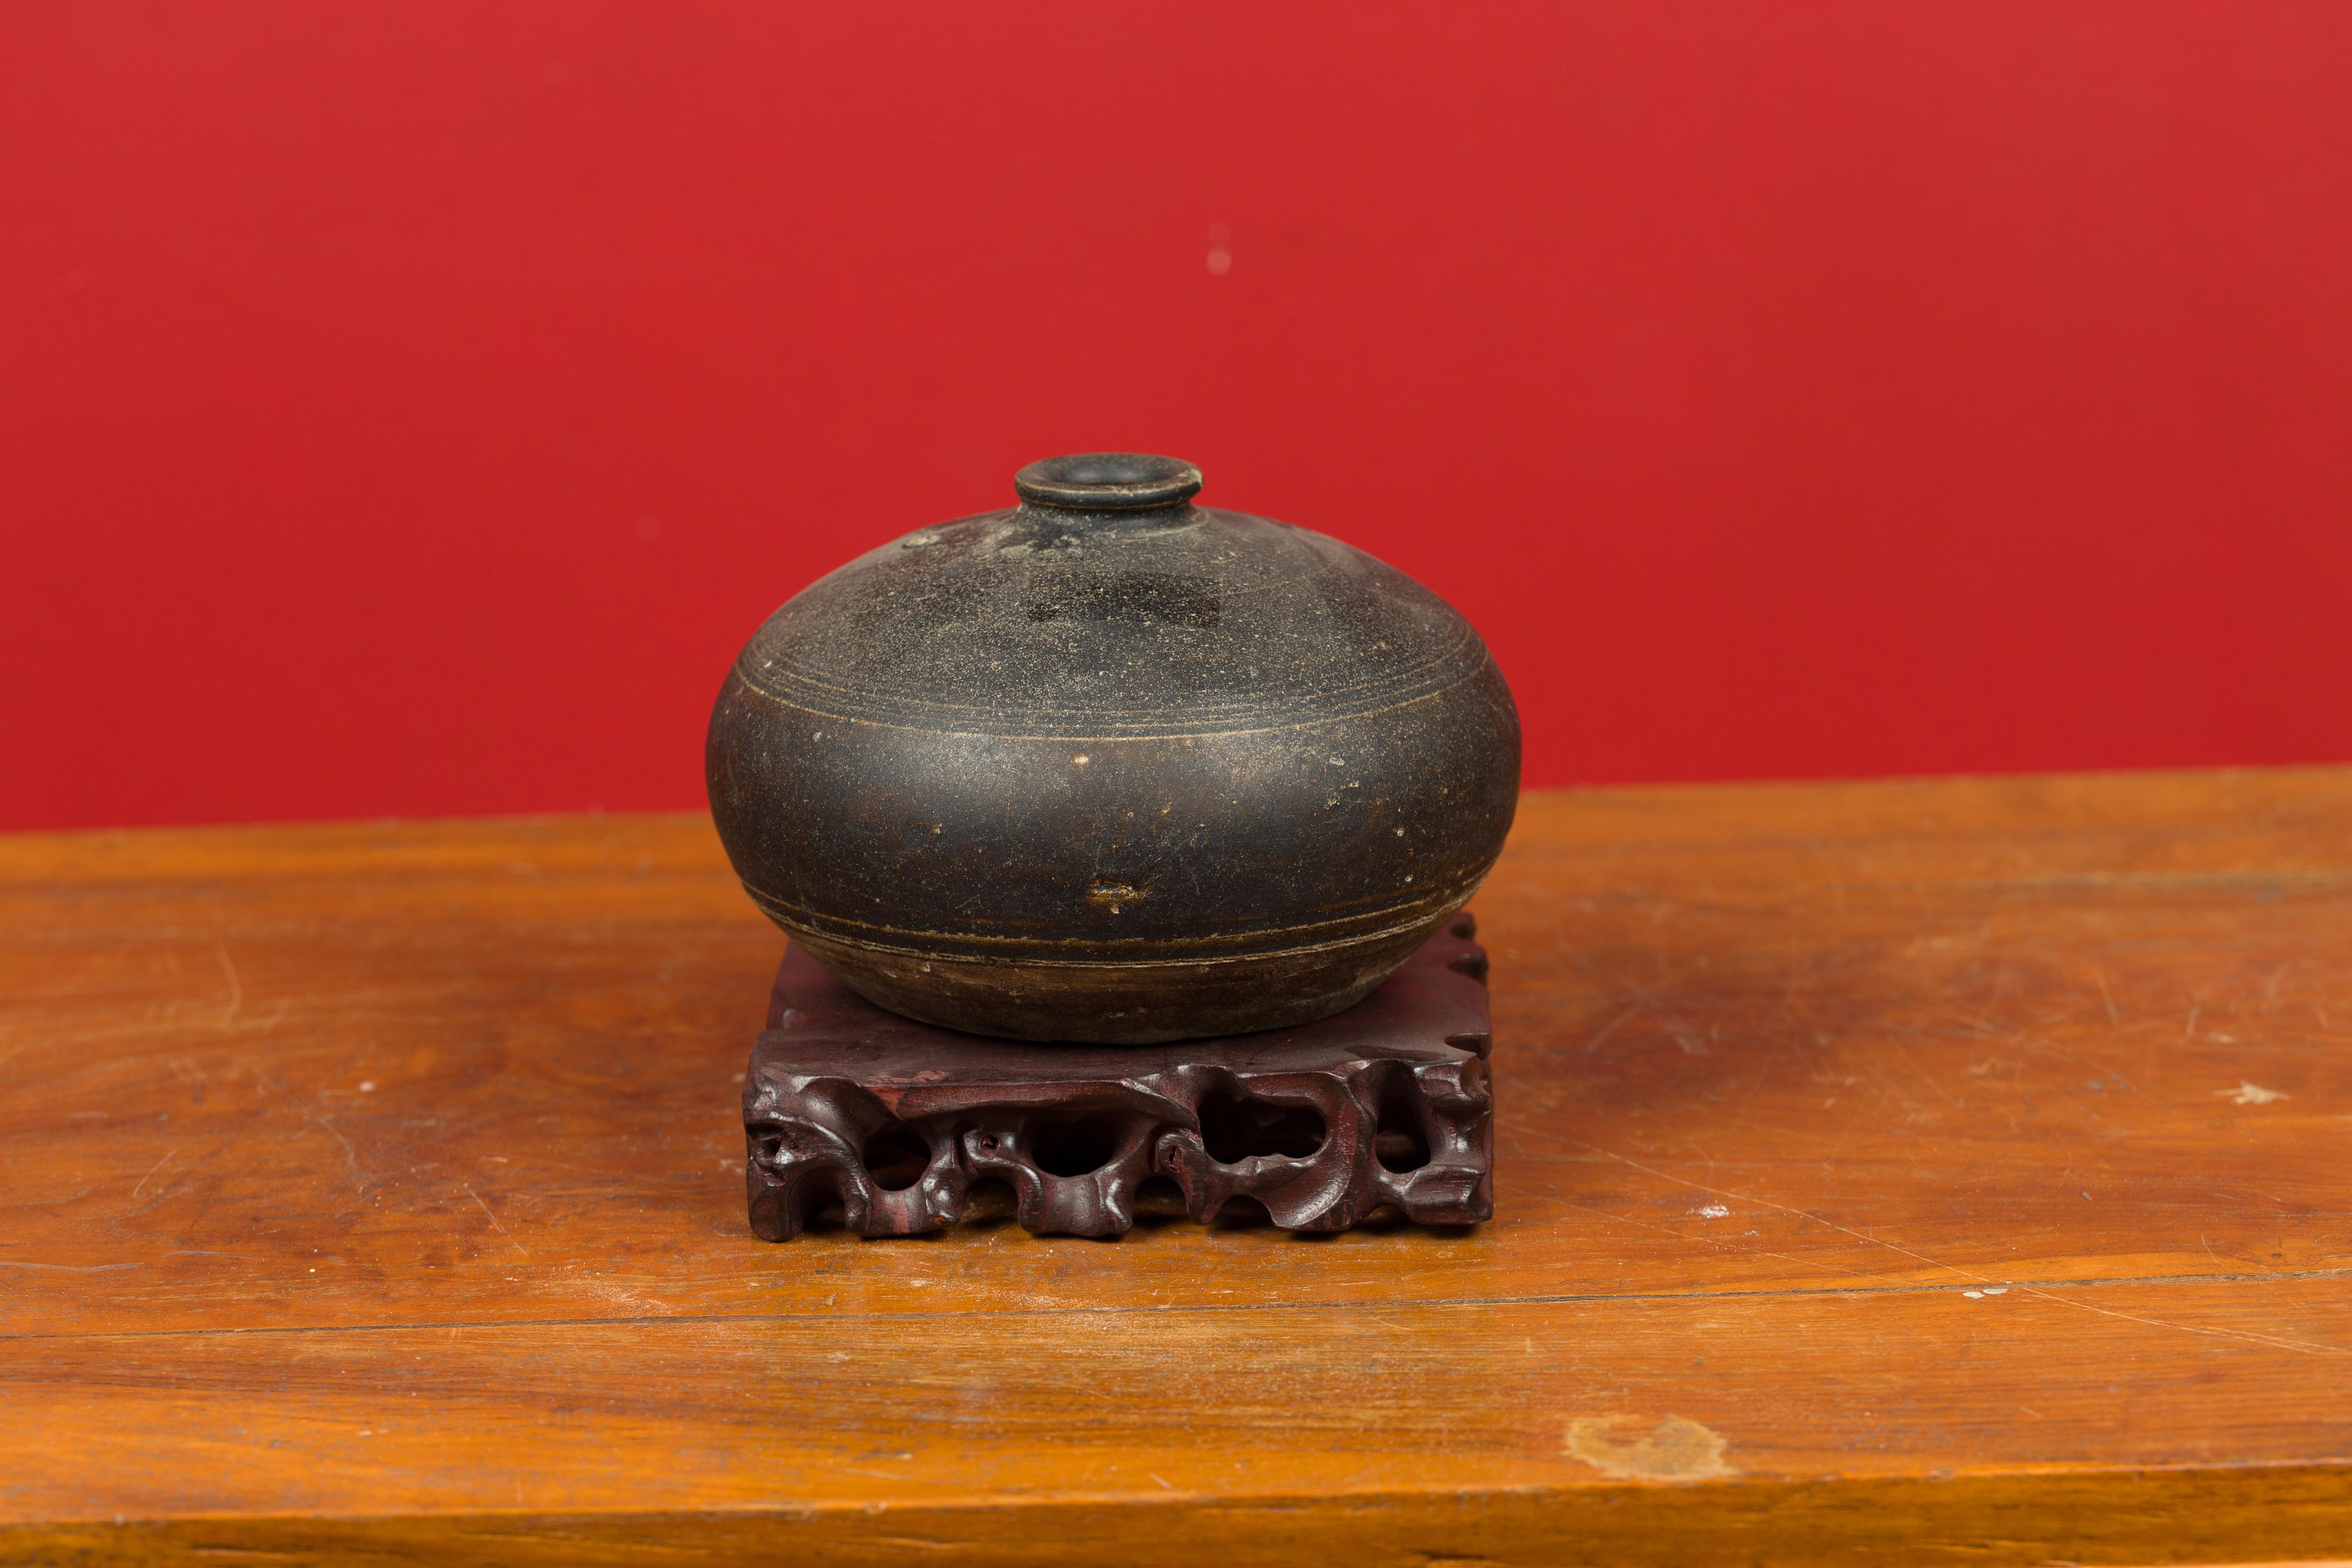 Cambodian Khmer Angkor Period 12th Century Black Glazed Ceramic with Concentric Lines